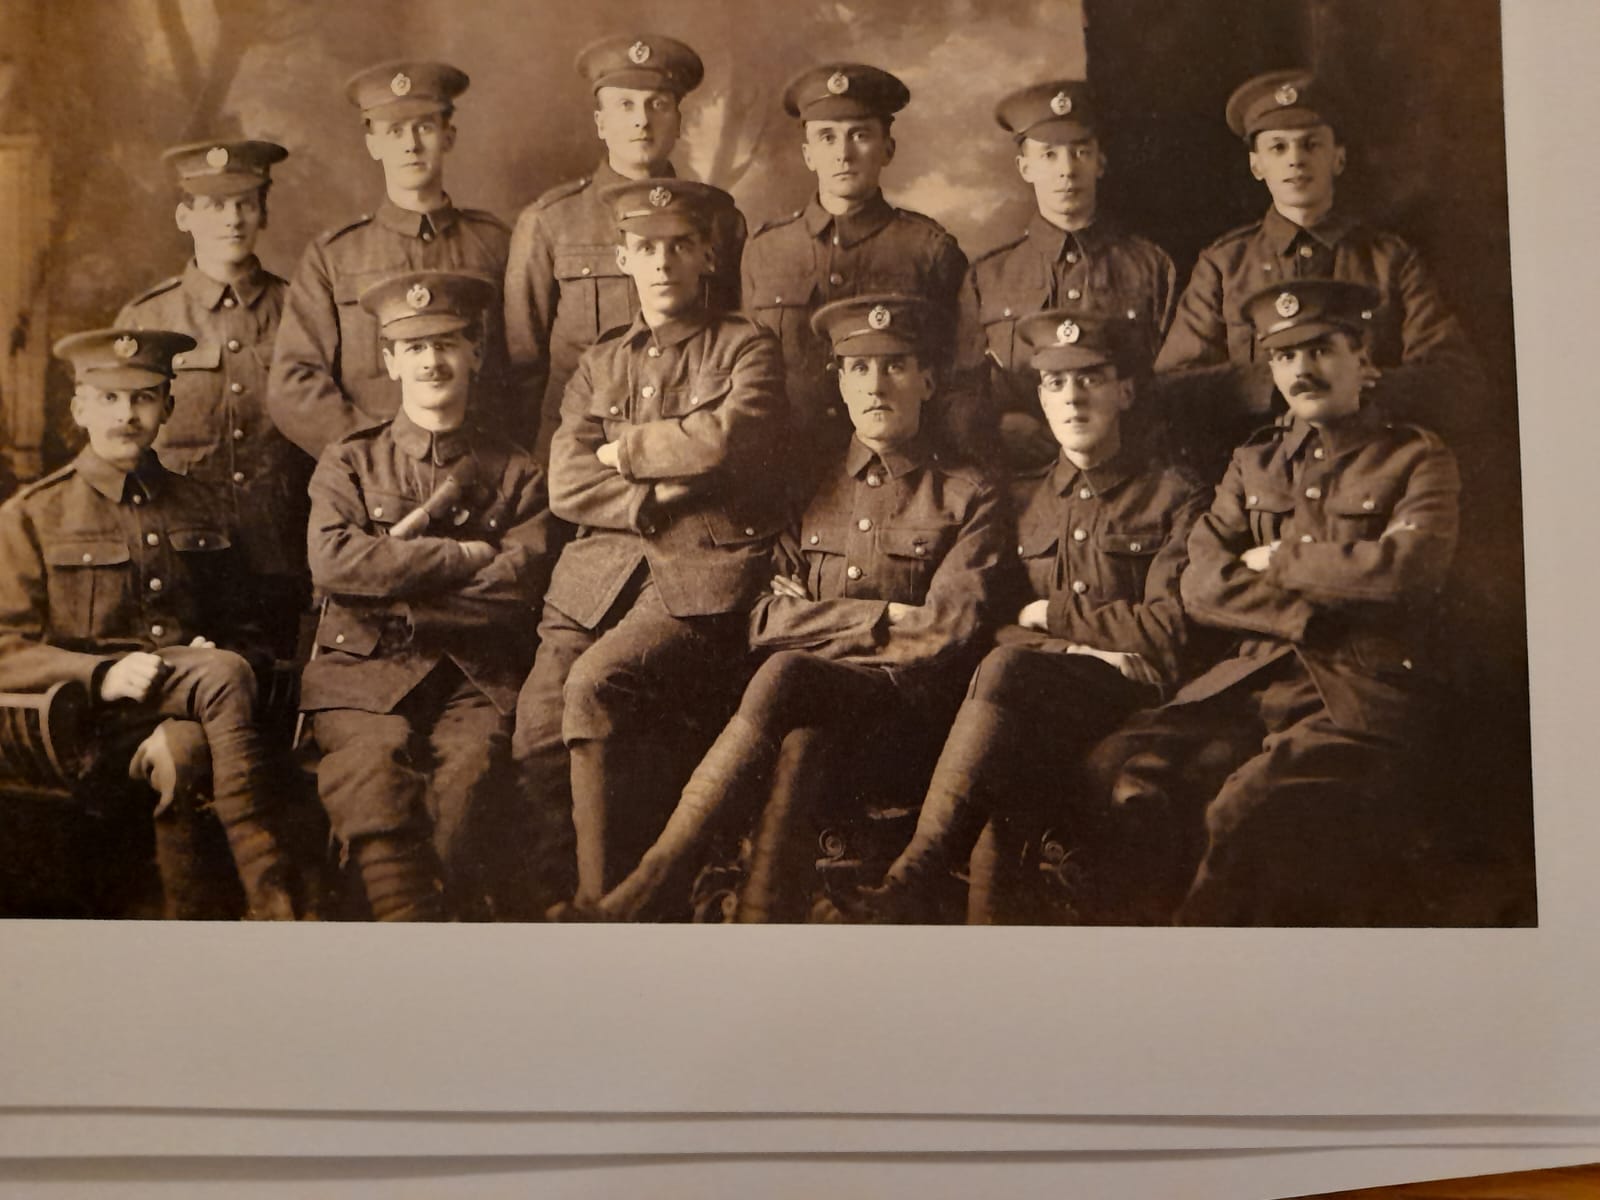 My great grandfather’s story would have been extraordinary but for it being one of thousands of similar tales of other brave young men from the same period